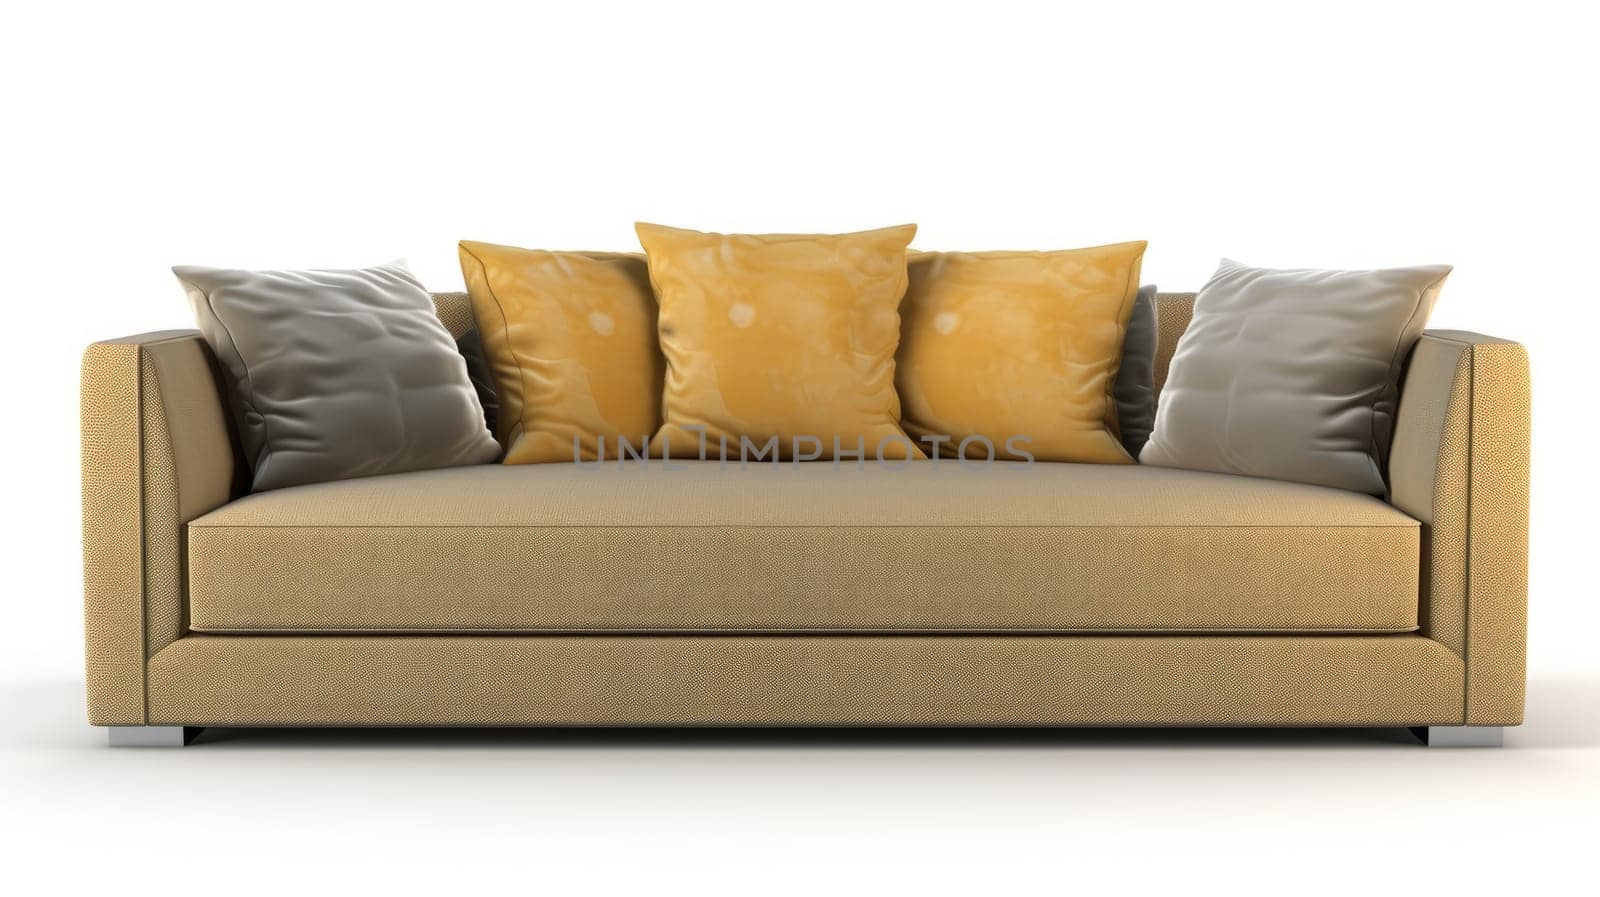 Mustard colored modern sofa with two grey pillows, isolated on a white background. by Zakharova